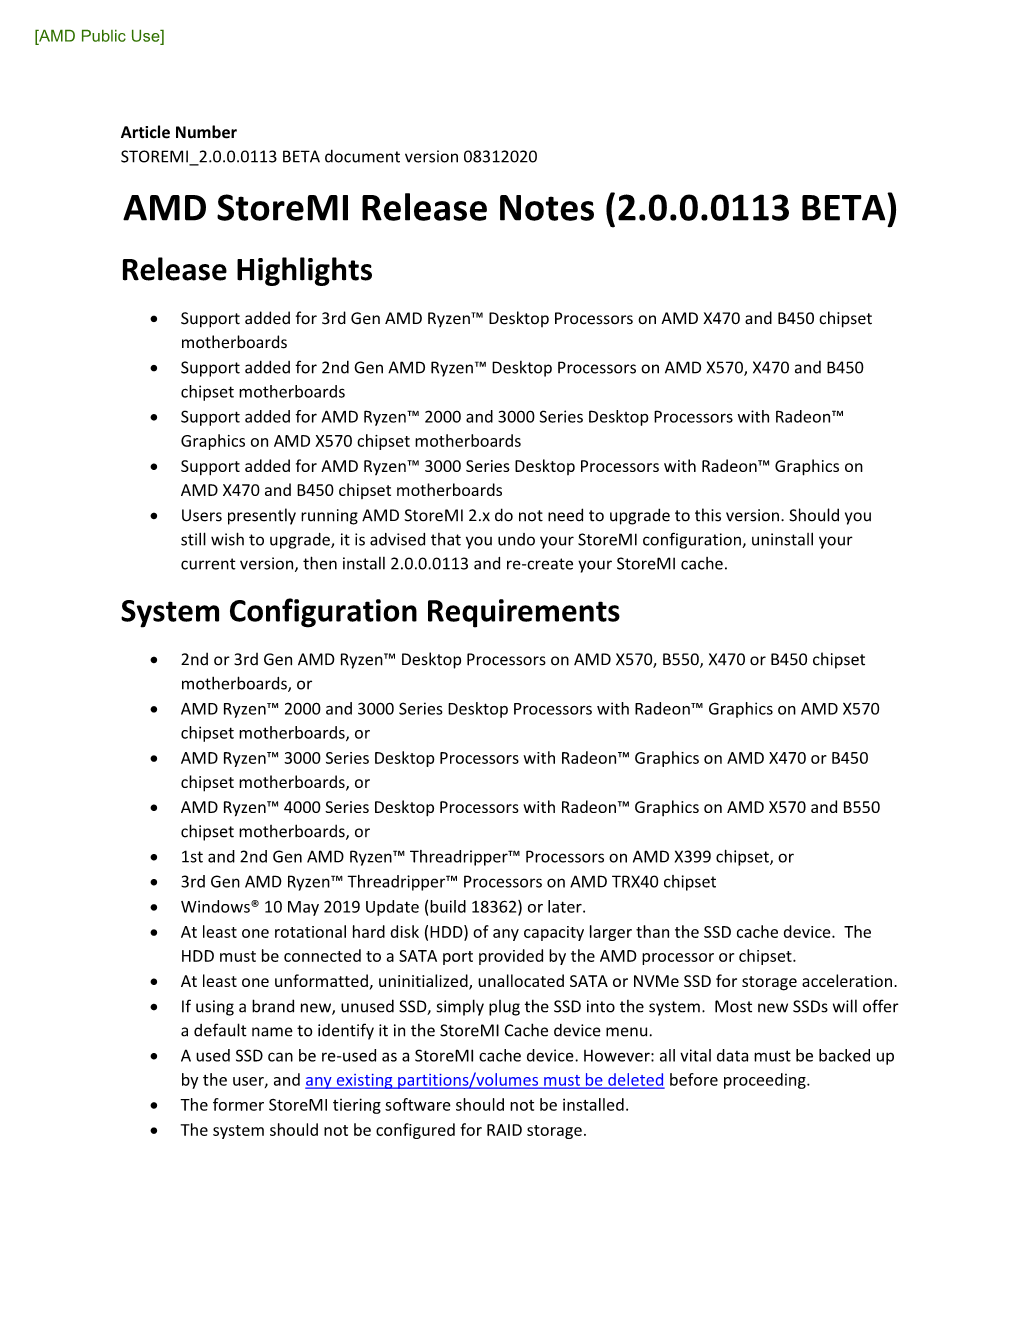 AMD Storemi Release Notes (2.0.0.0113 BETA) Release Highlights